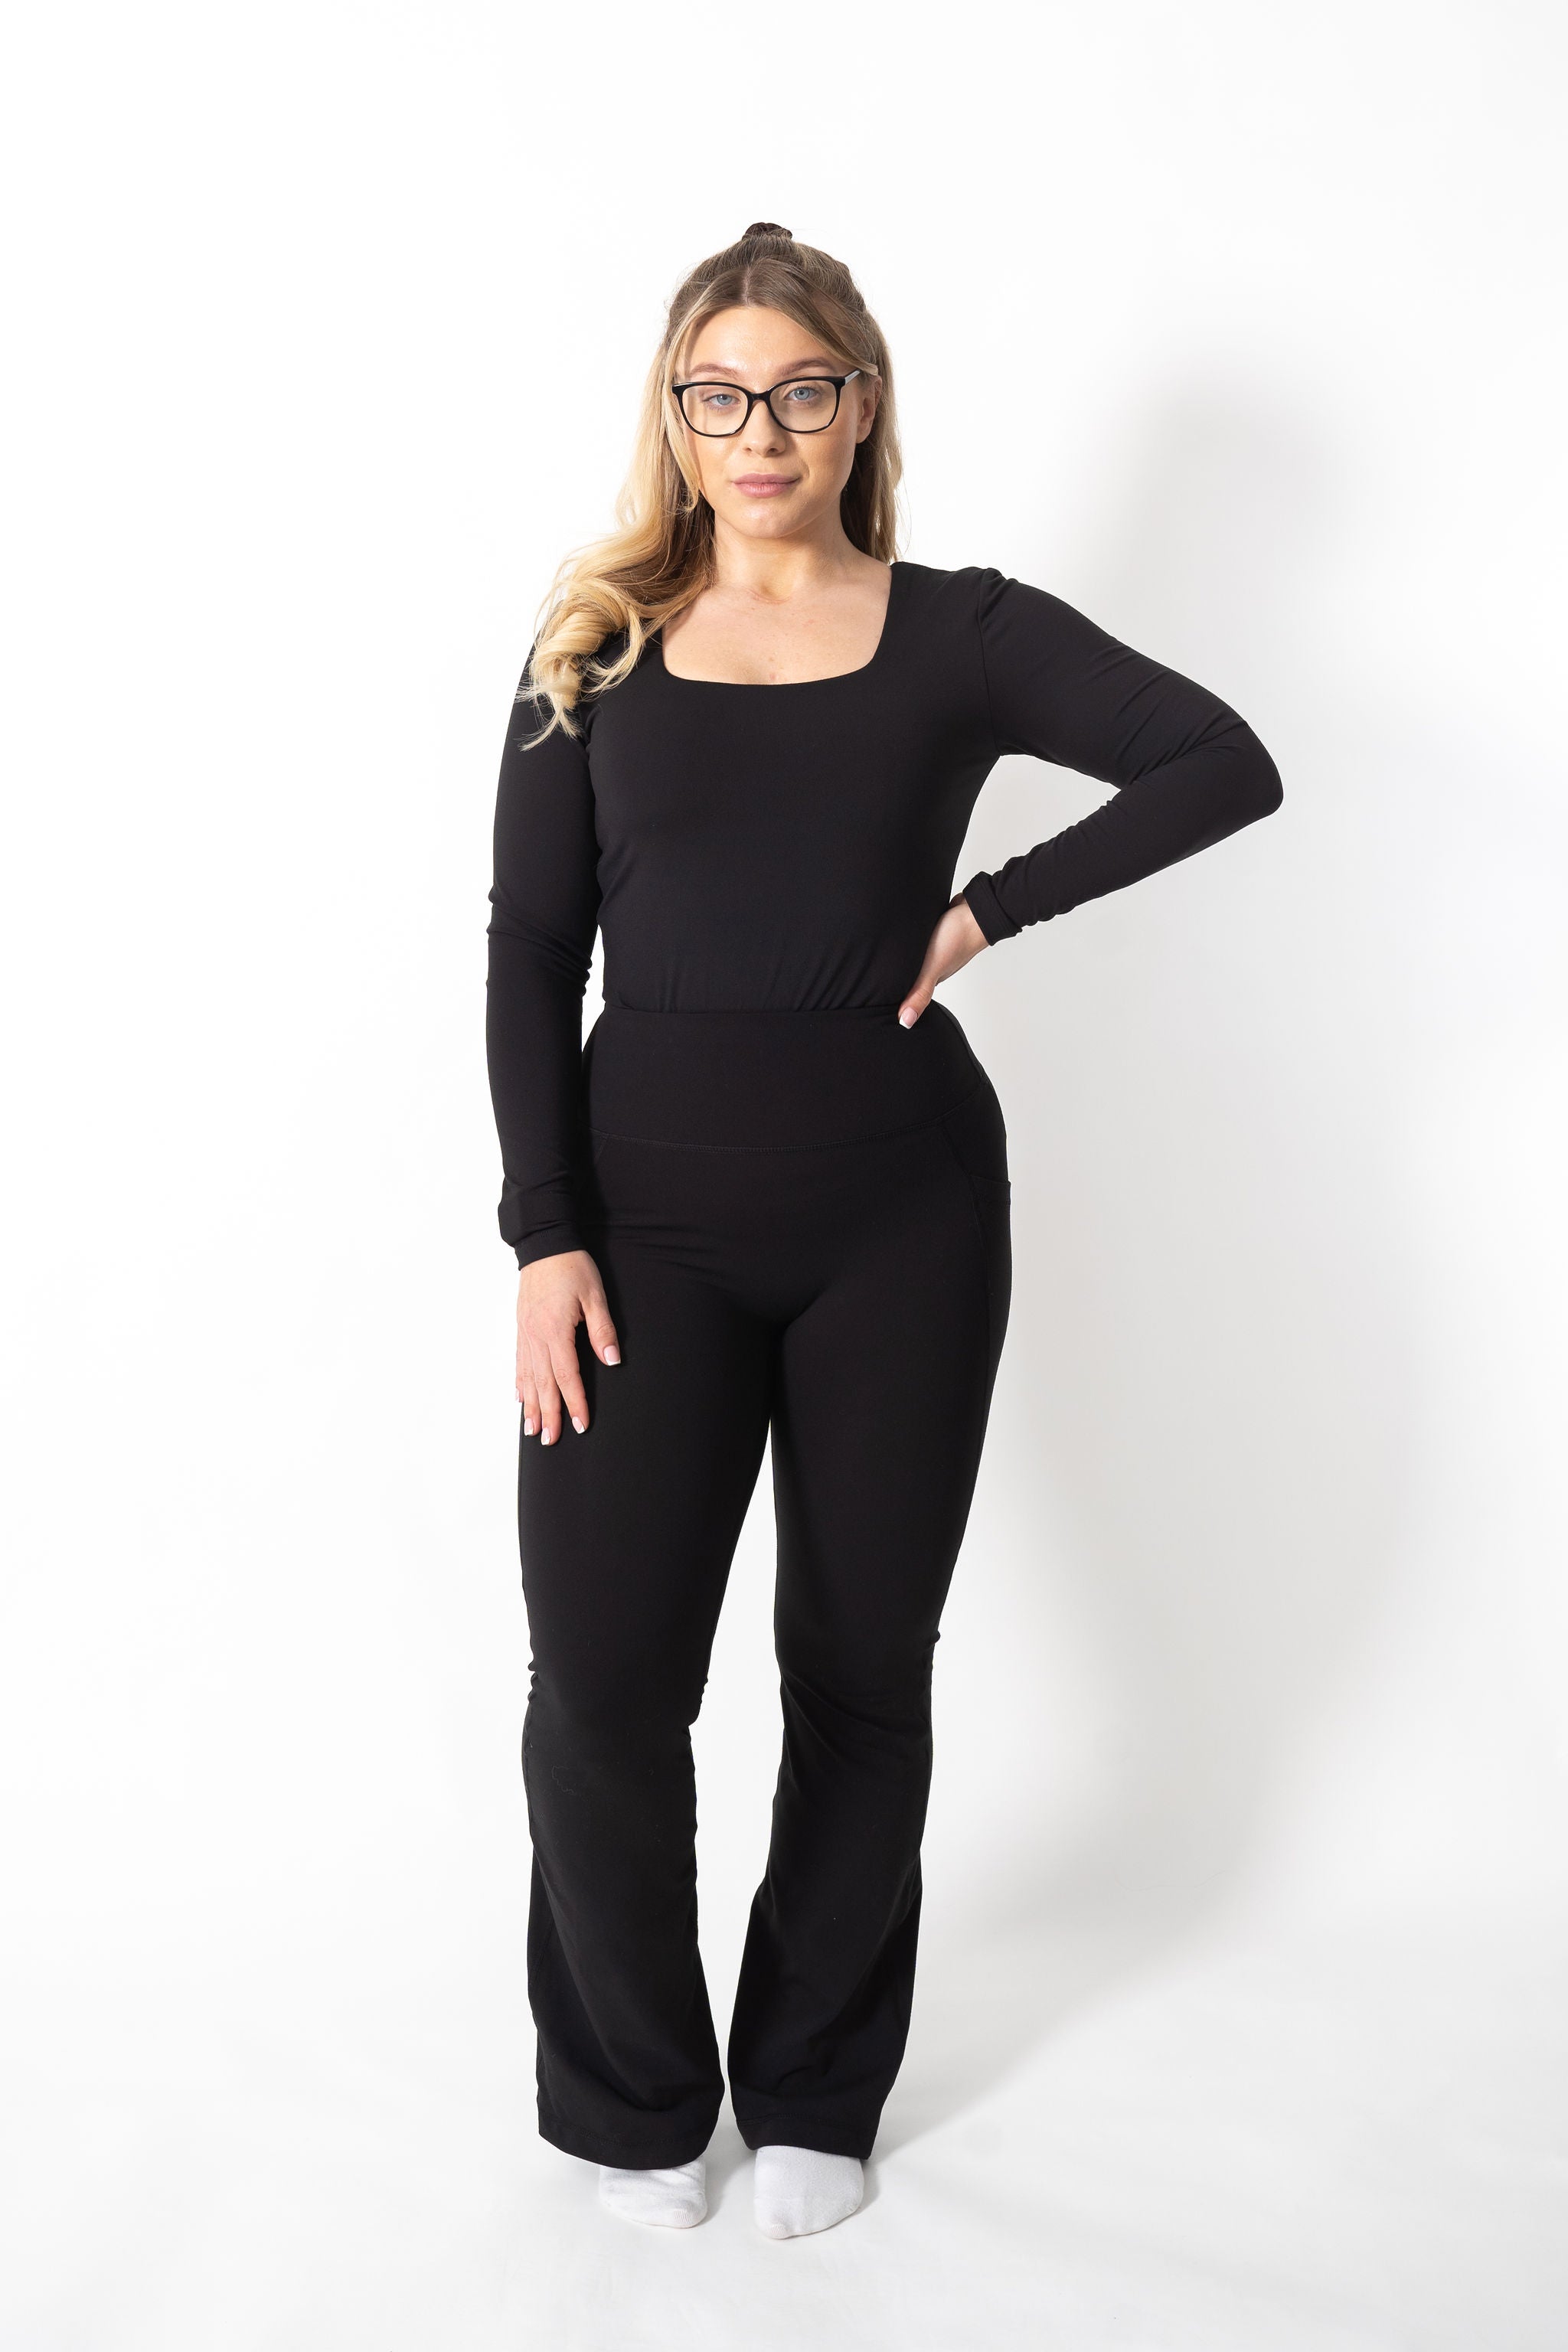 Basics Reversible Long Sleeve Top - J.LUXE.FIT